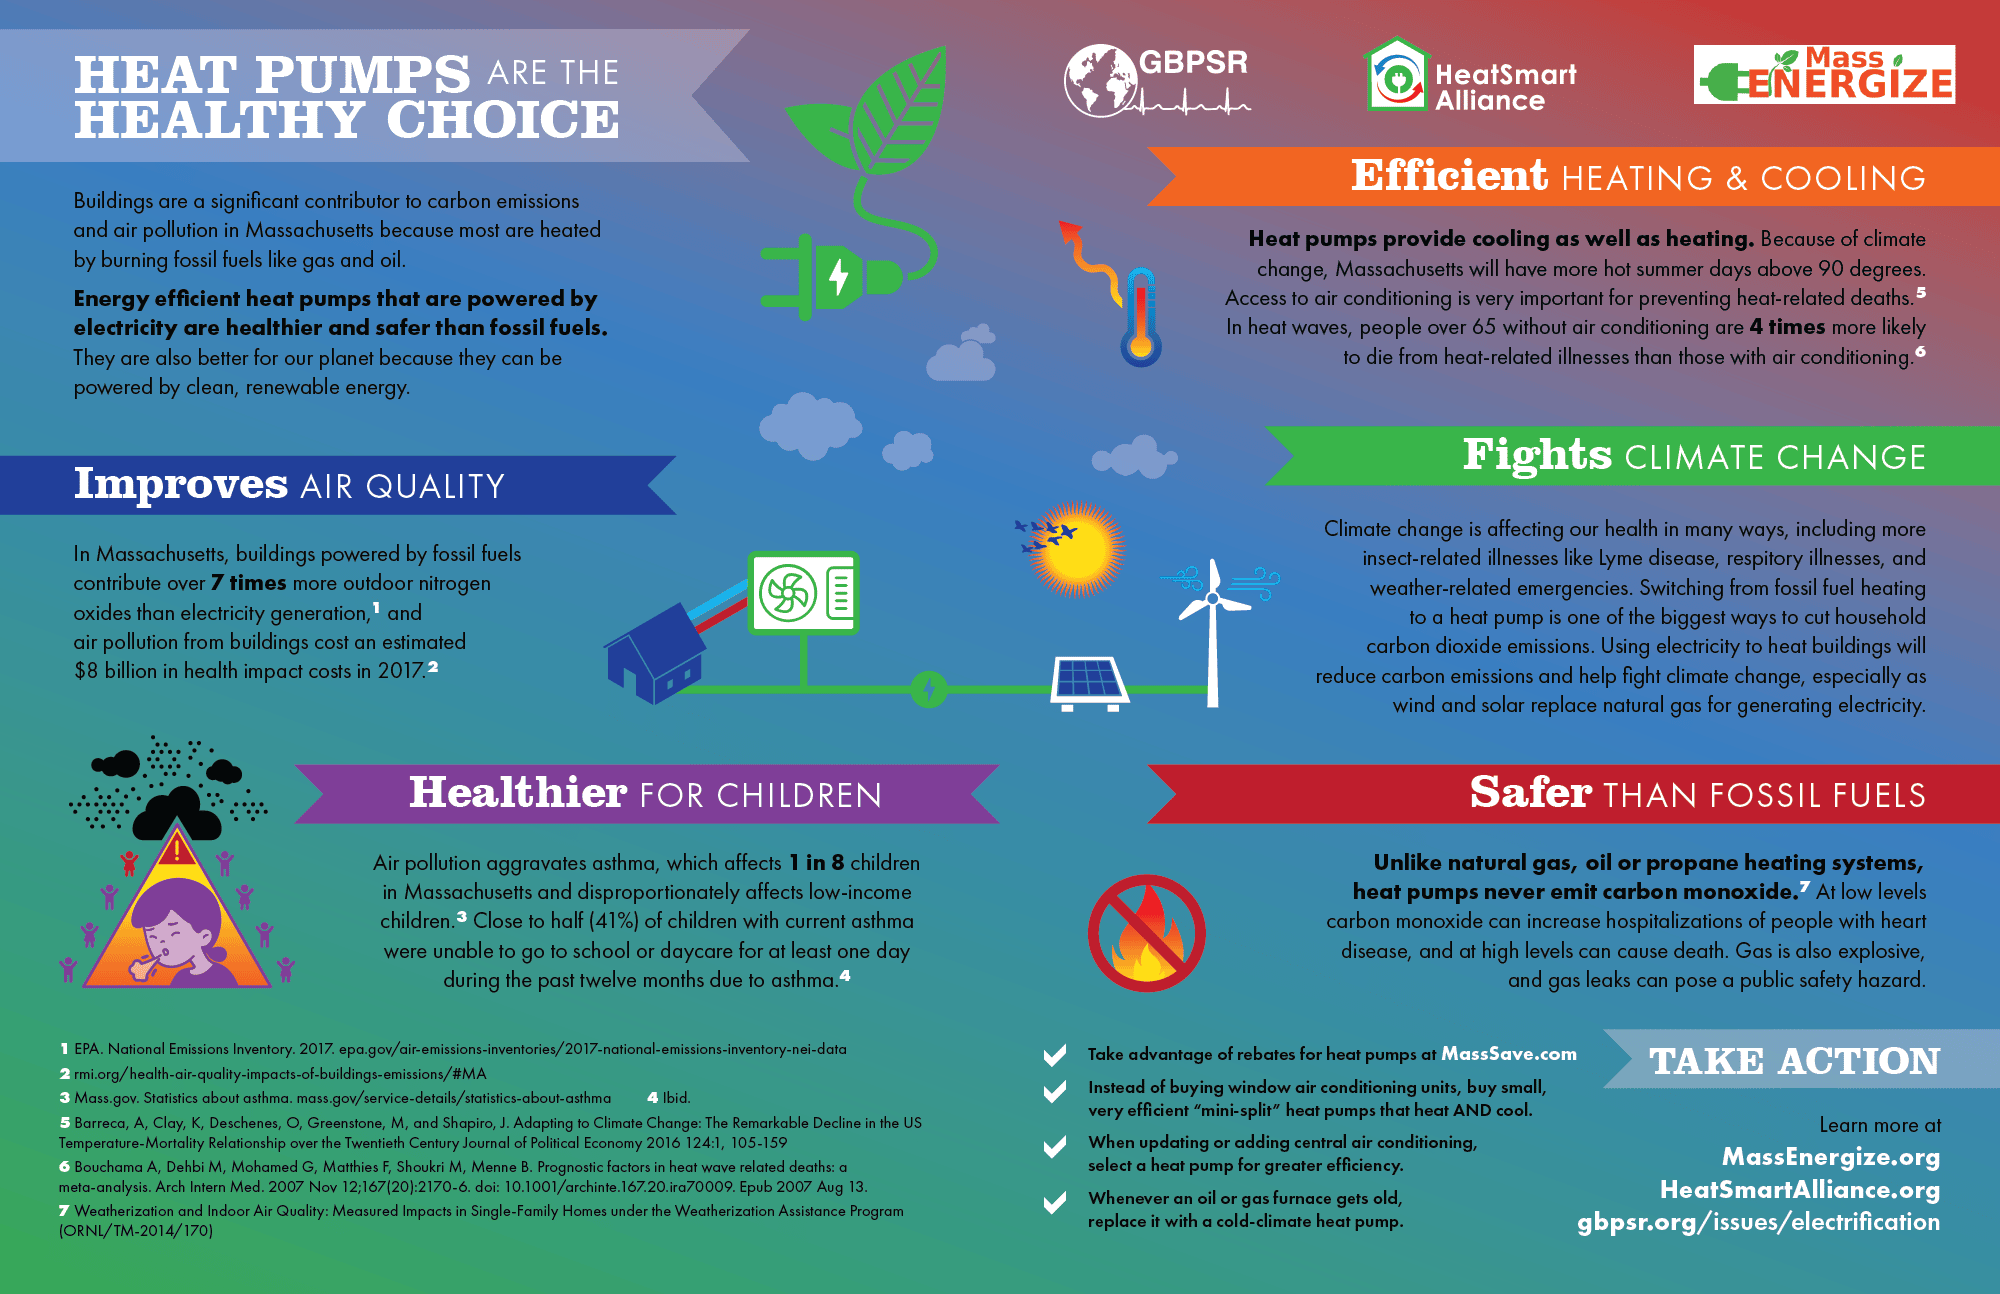 "Heat Pumps Are the Healthy Choice" flyer: -Improves Air Quality -Healthier for Children -Efficient Heating & Cooling -Fights Climate Change -Safer than Fossil Fuels